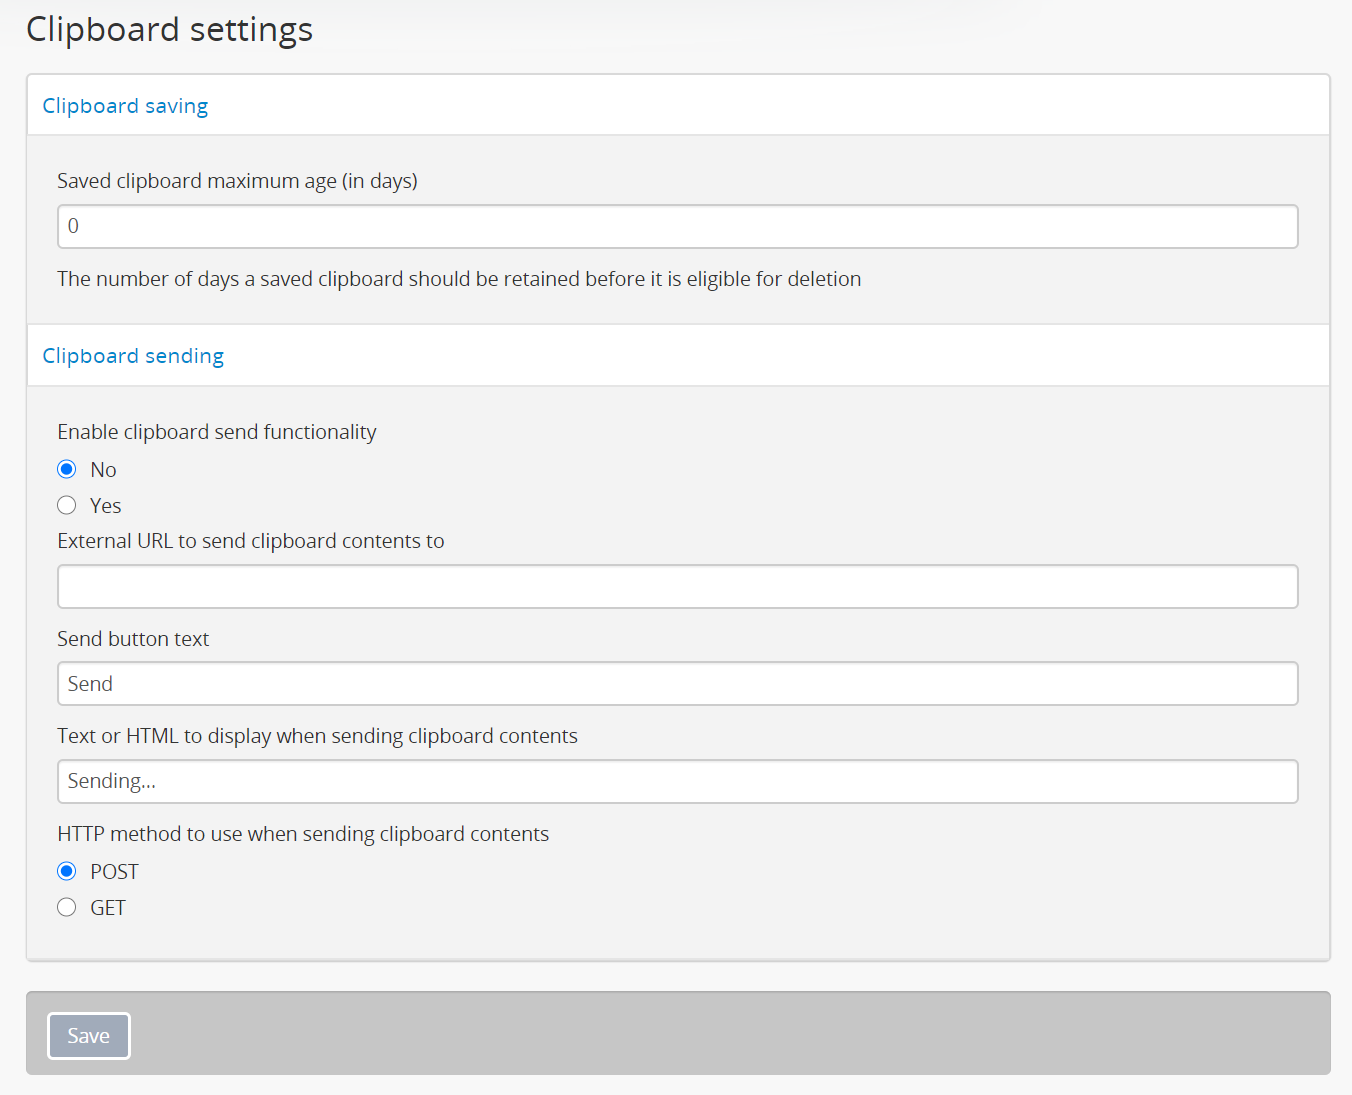 Clipboard settings page in AtoM